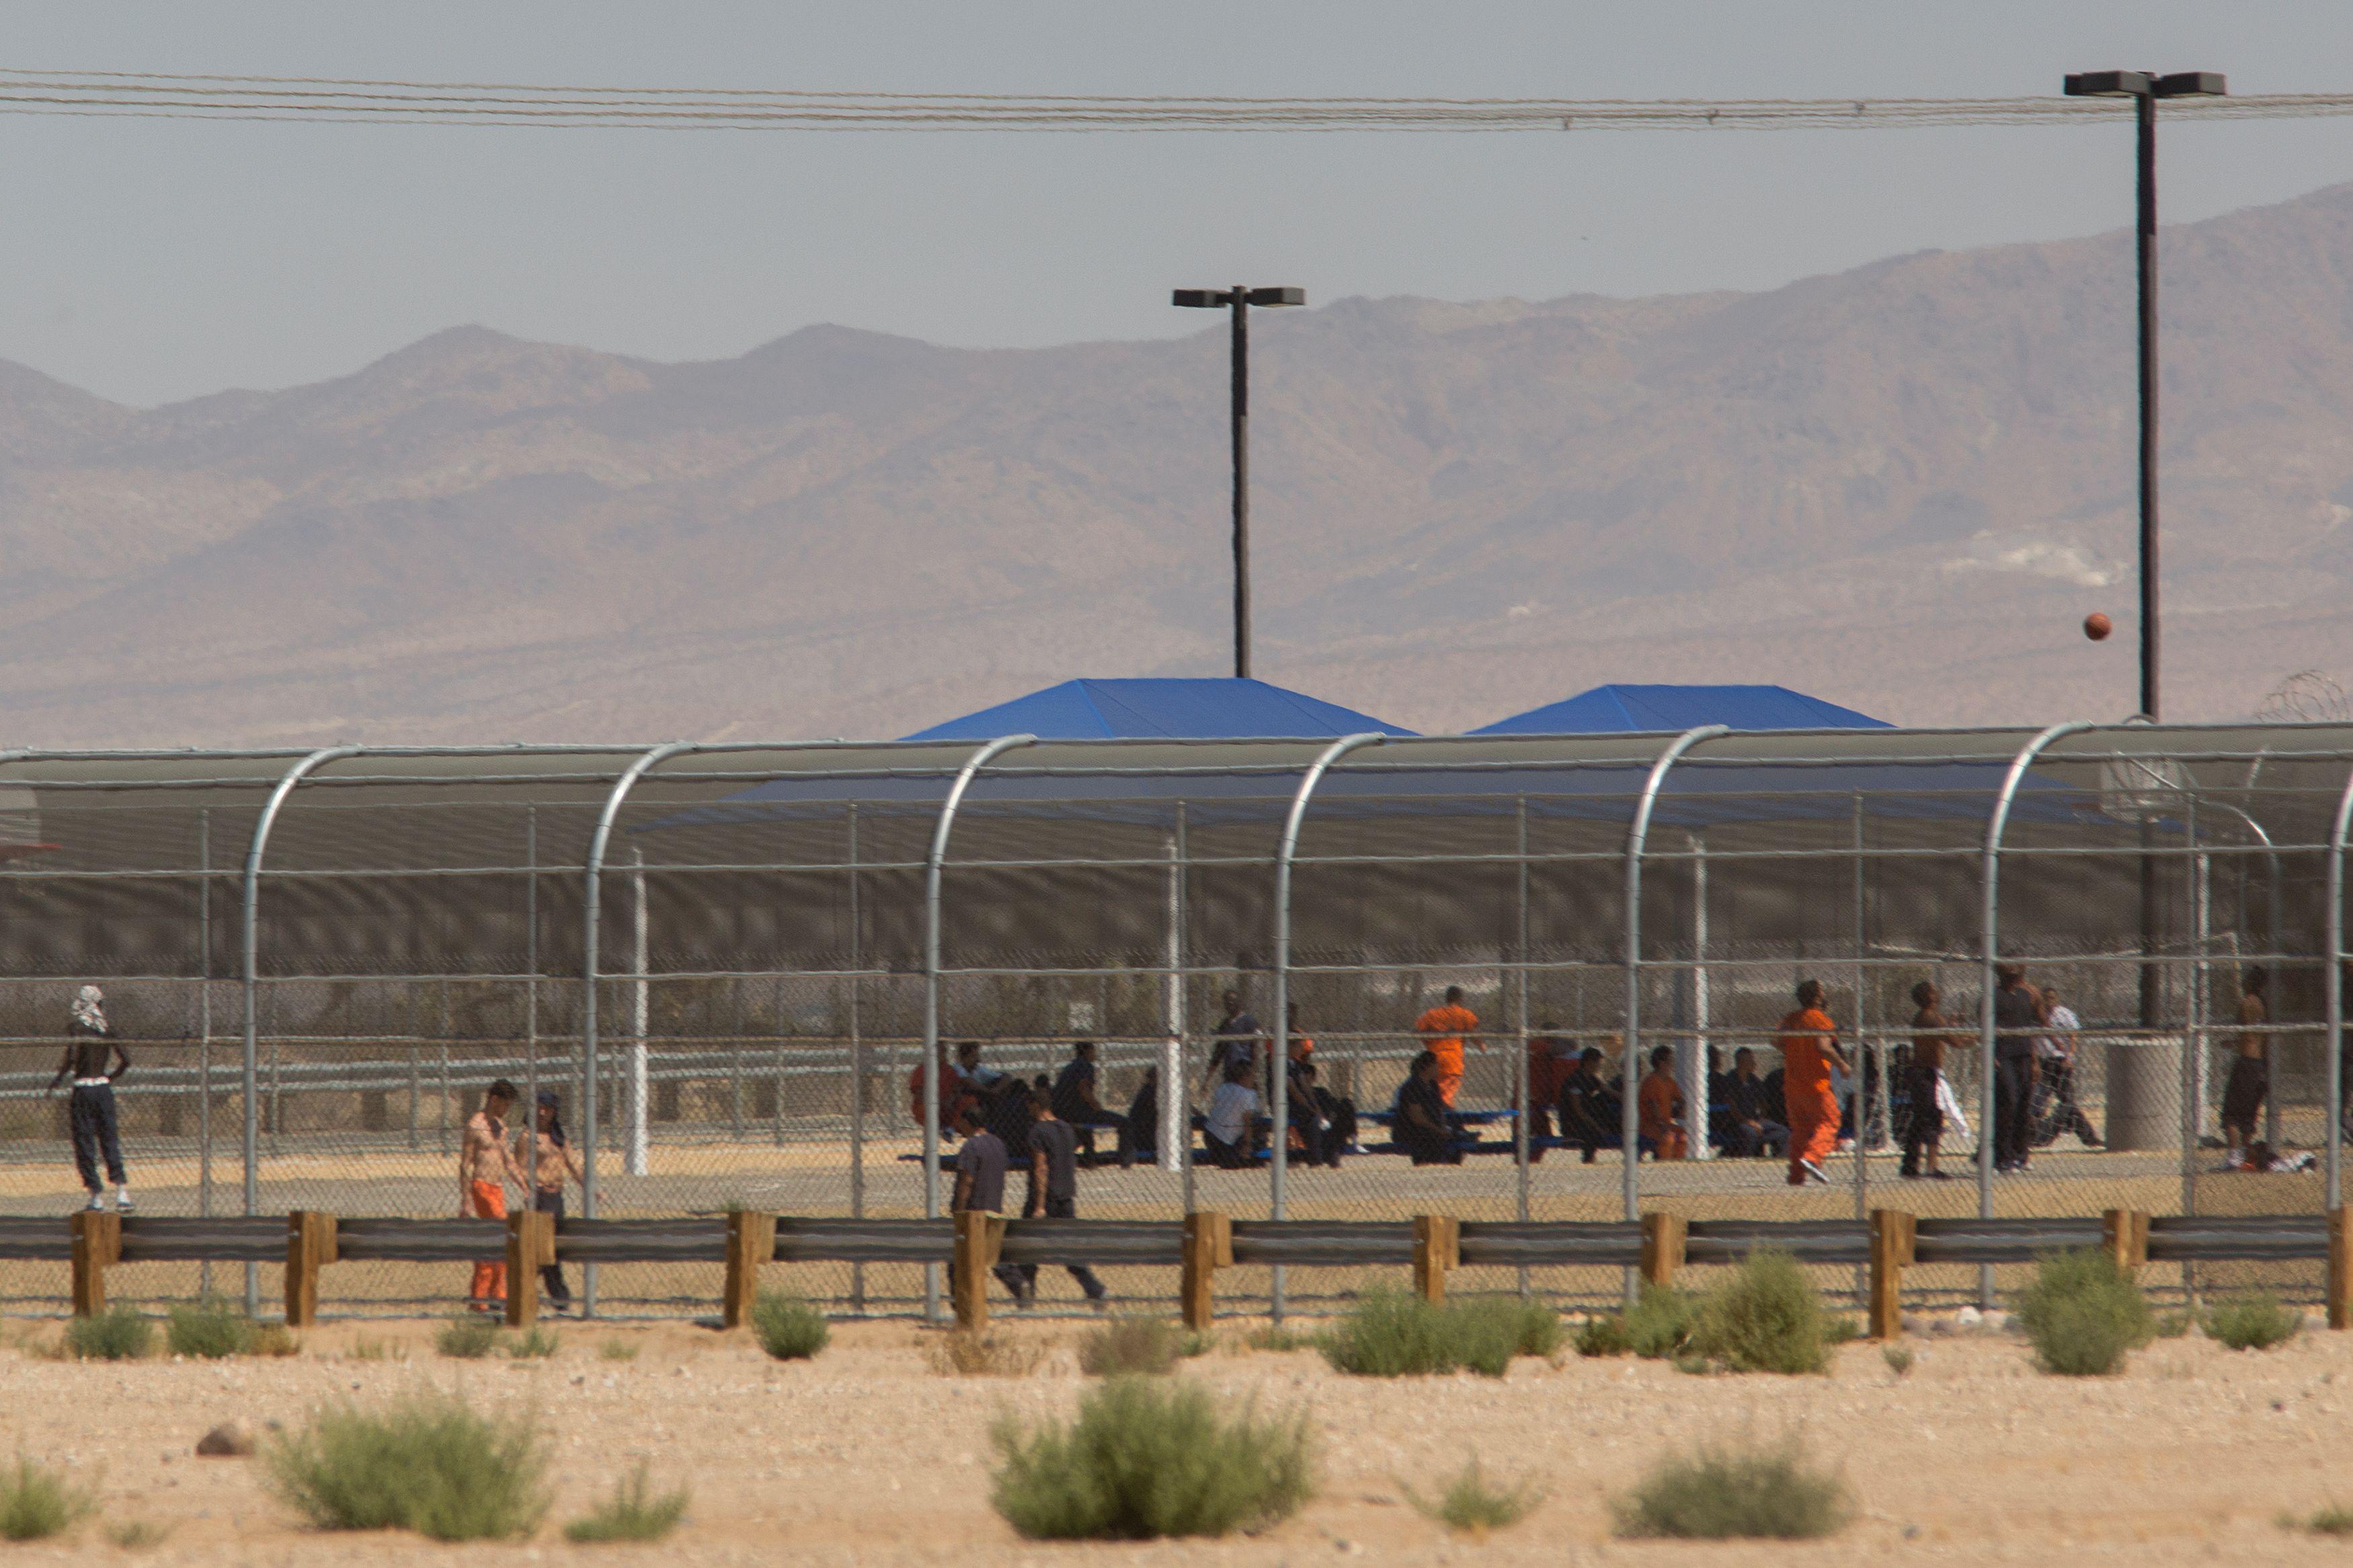 Adults in prisonlike clothes can be seen behind a fenced-off facility in the desert with mountains in the background.